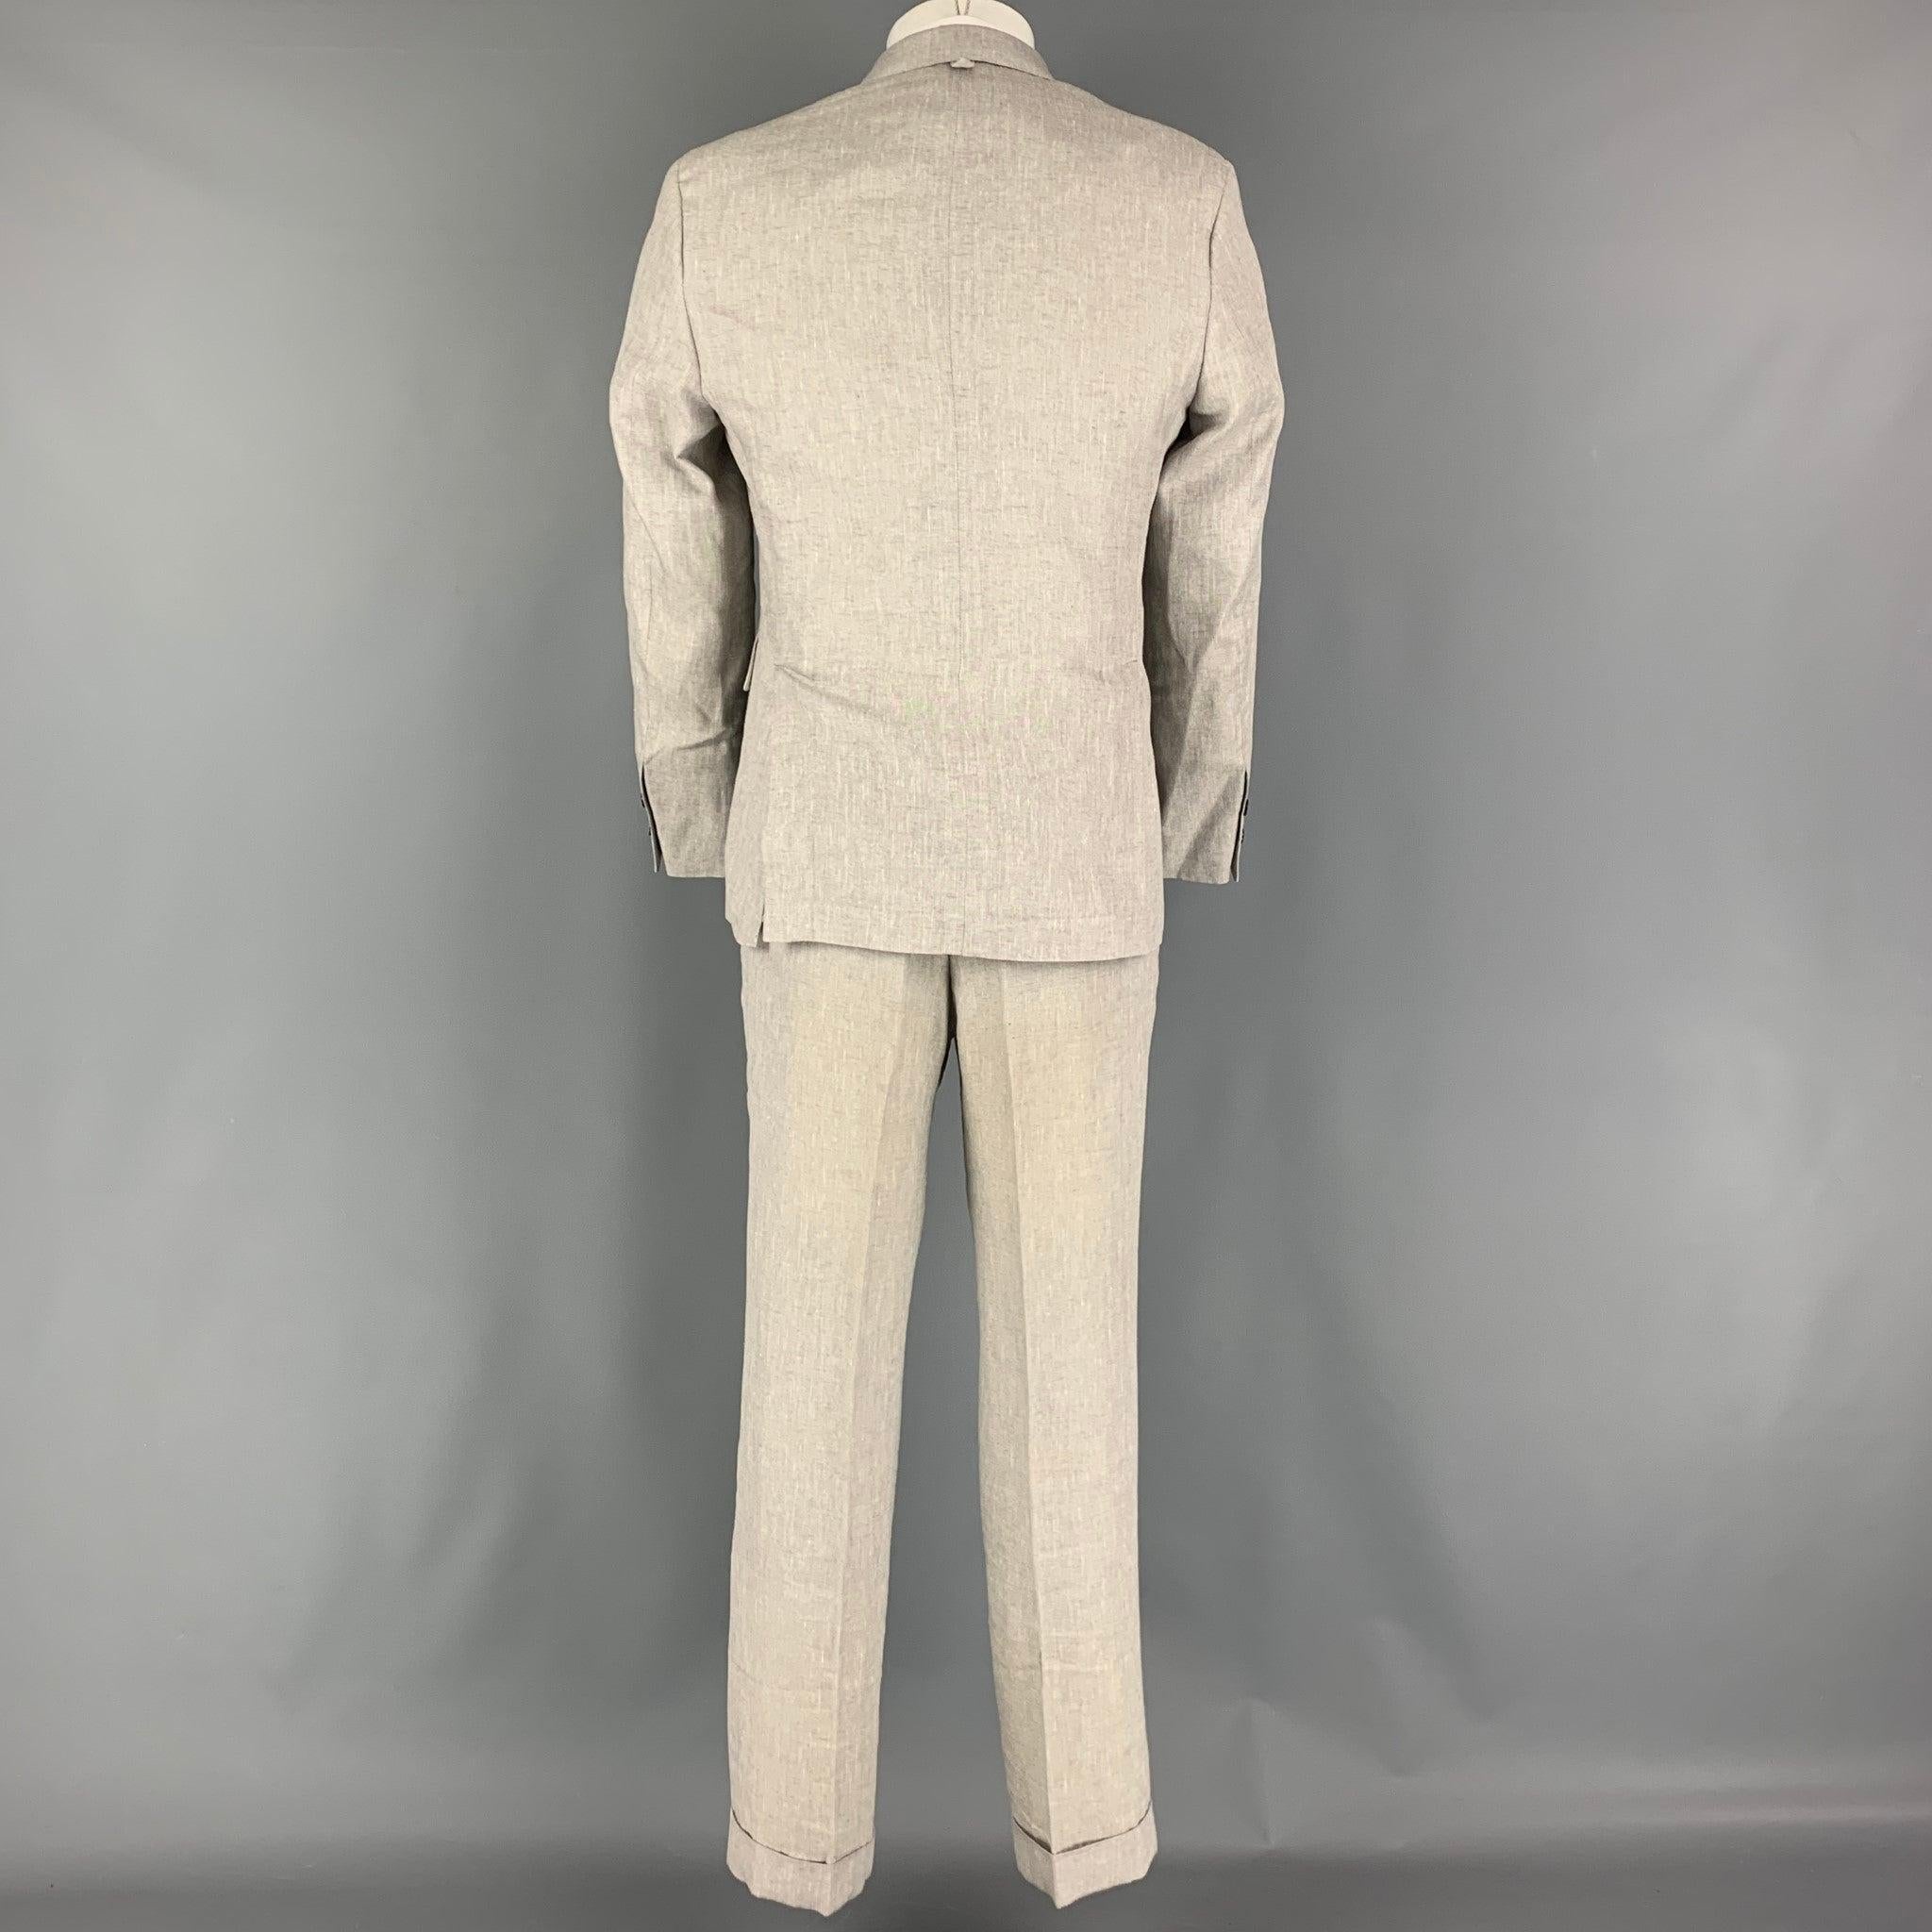 BLACK FLEECE suit comes in a grey and silver linen bend material with a full liner and includes a single breasted, three button sport coat with a notch lapel and matching flat front trousers. Made in USA.Very Good Pre-Owned Condition. As Is. Marks